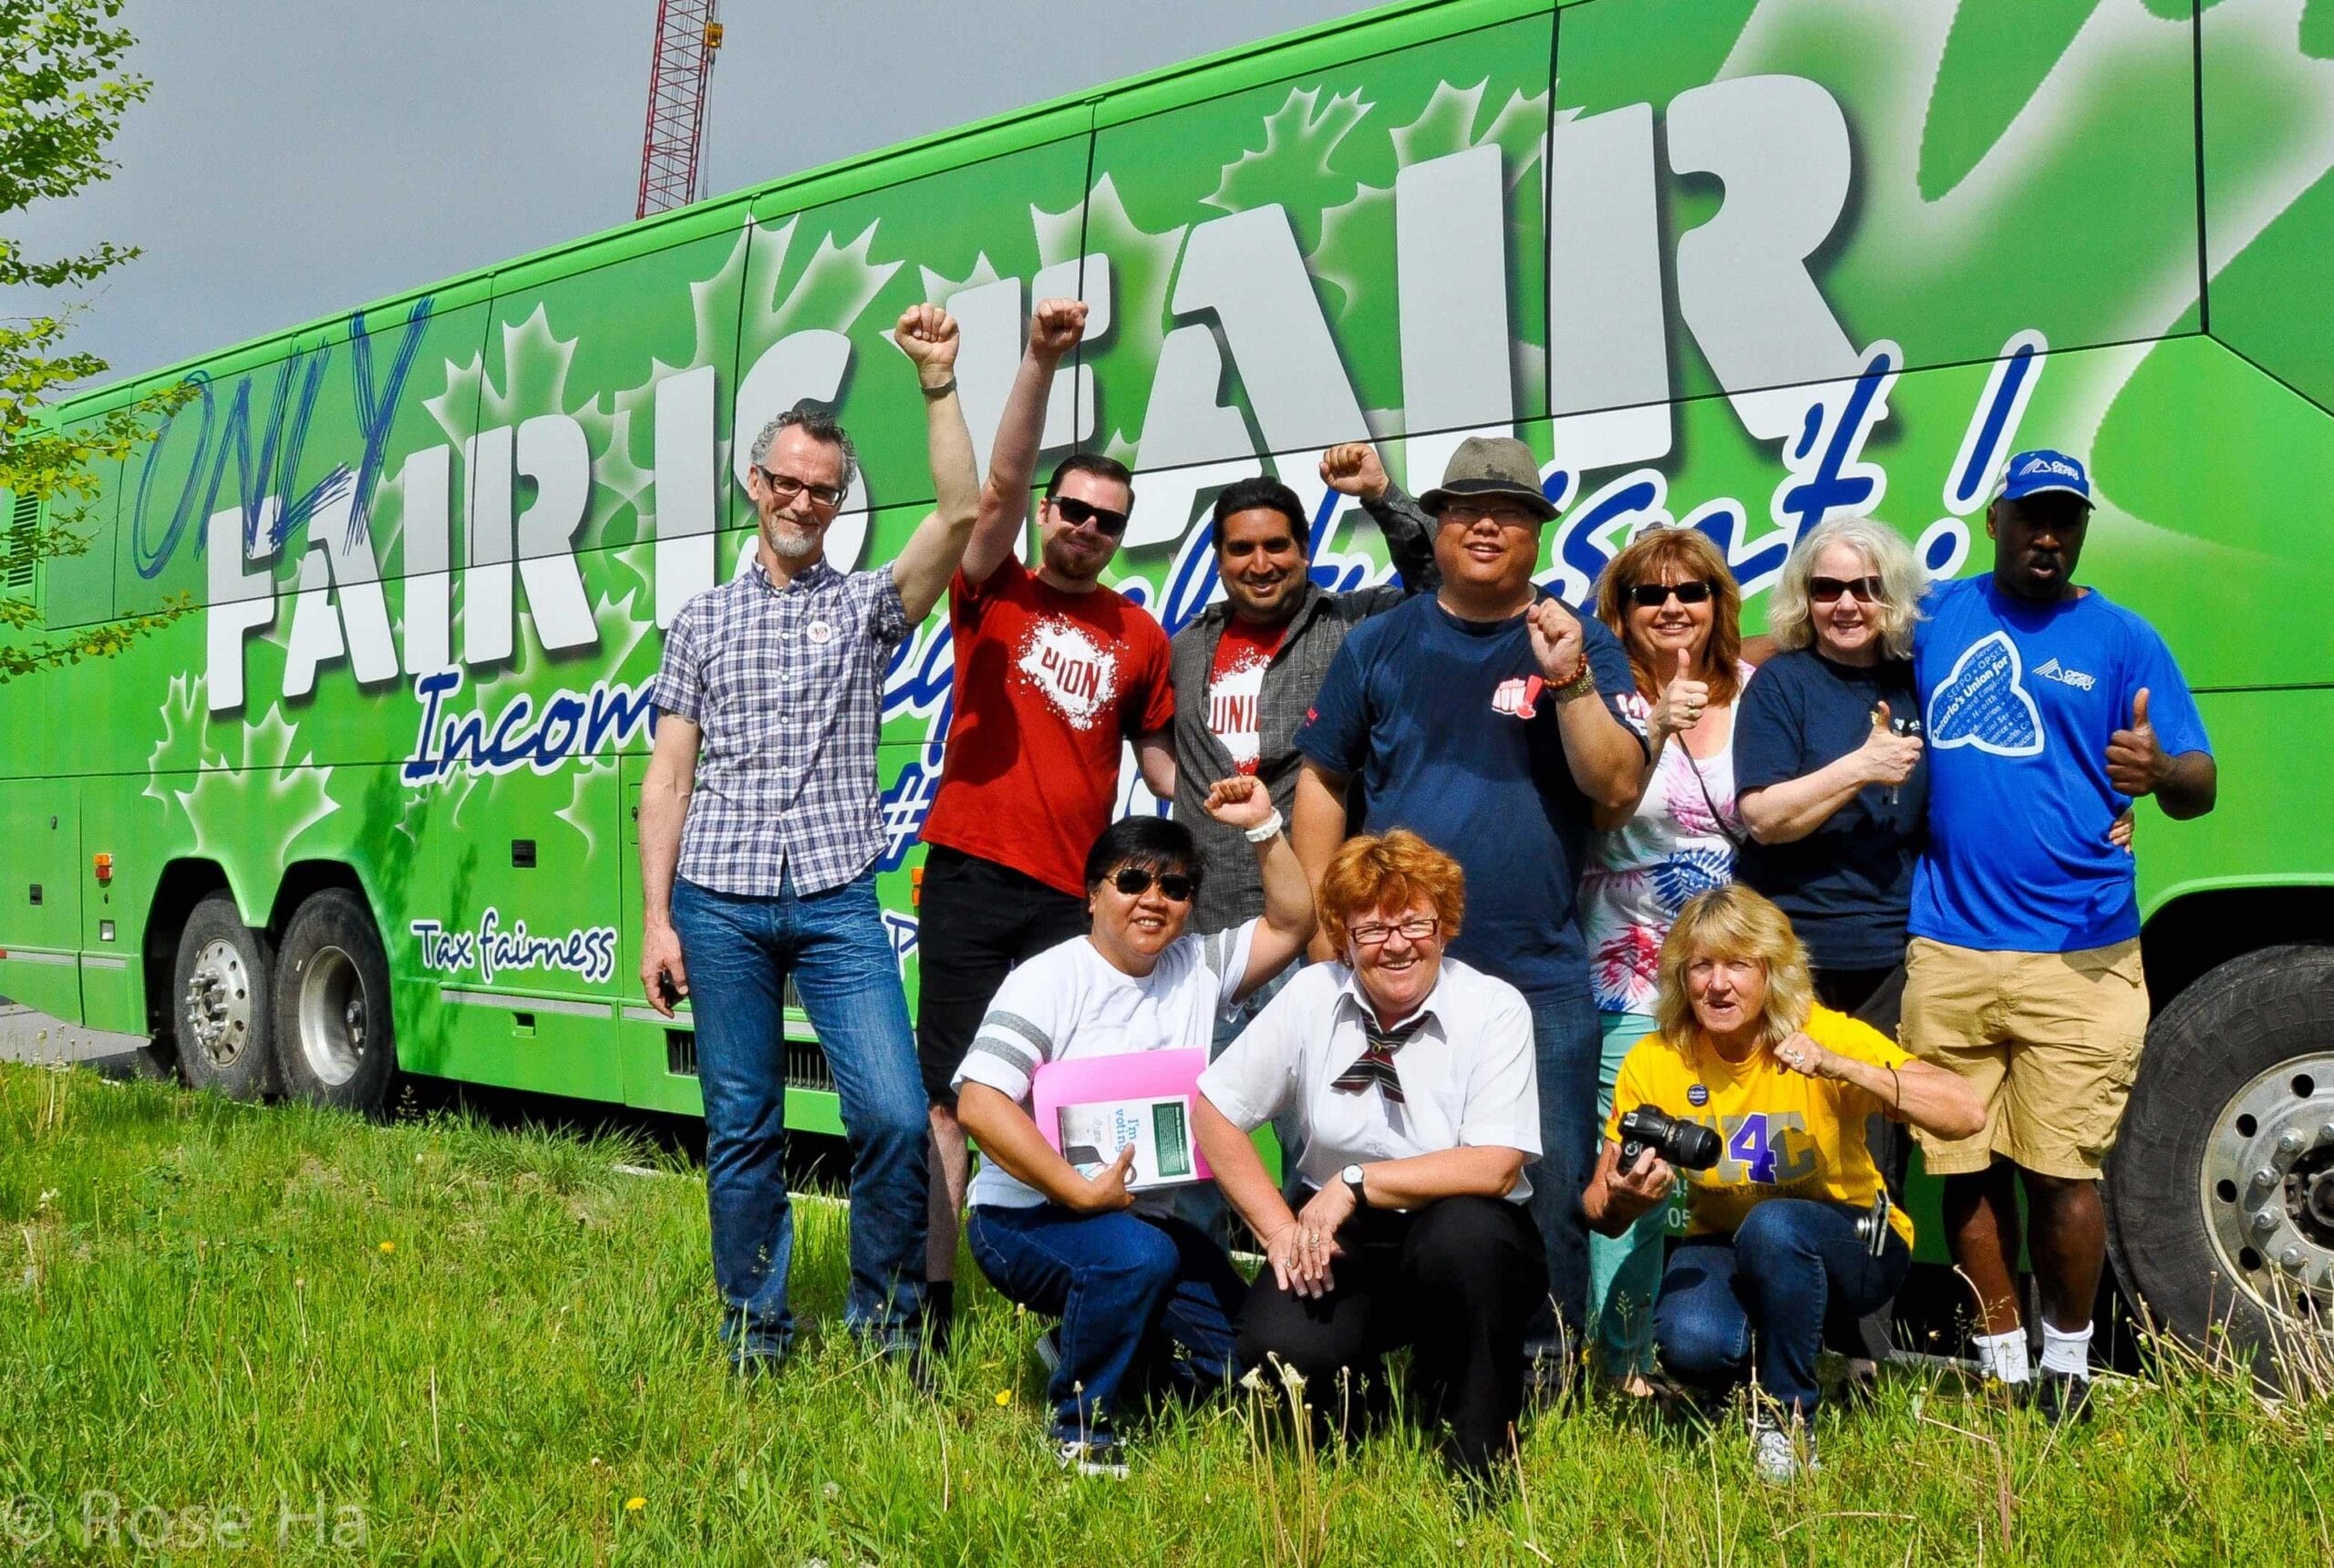 OPSEU members posing in front of the bus that says: Only fair is fair.